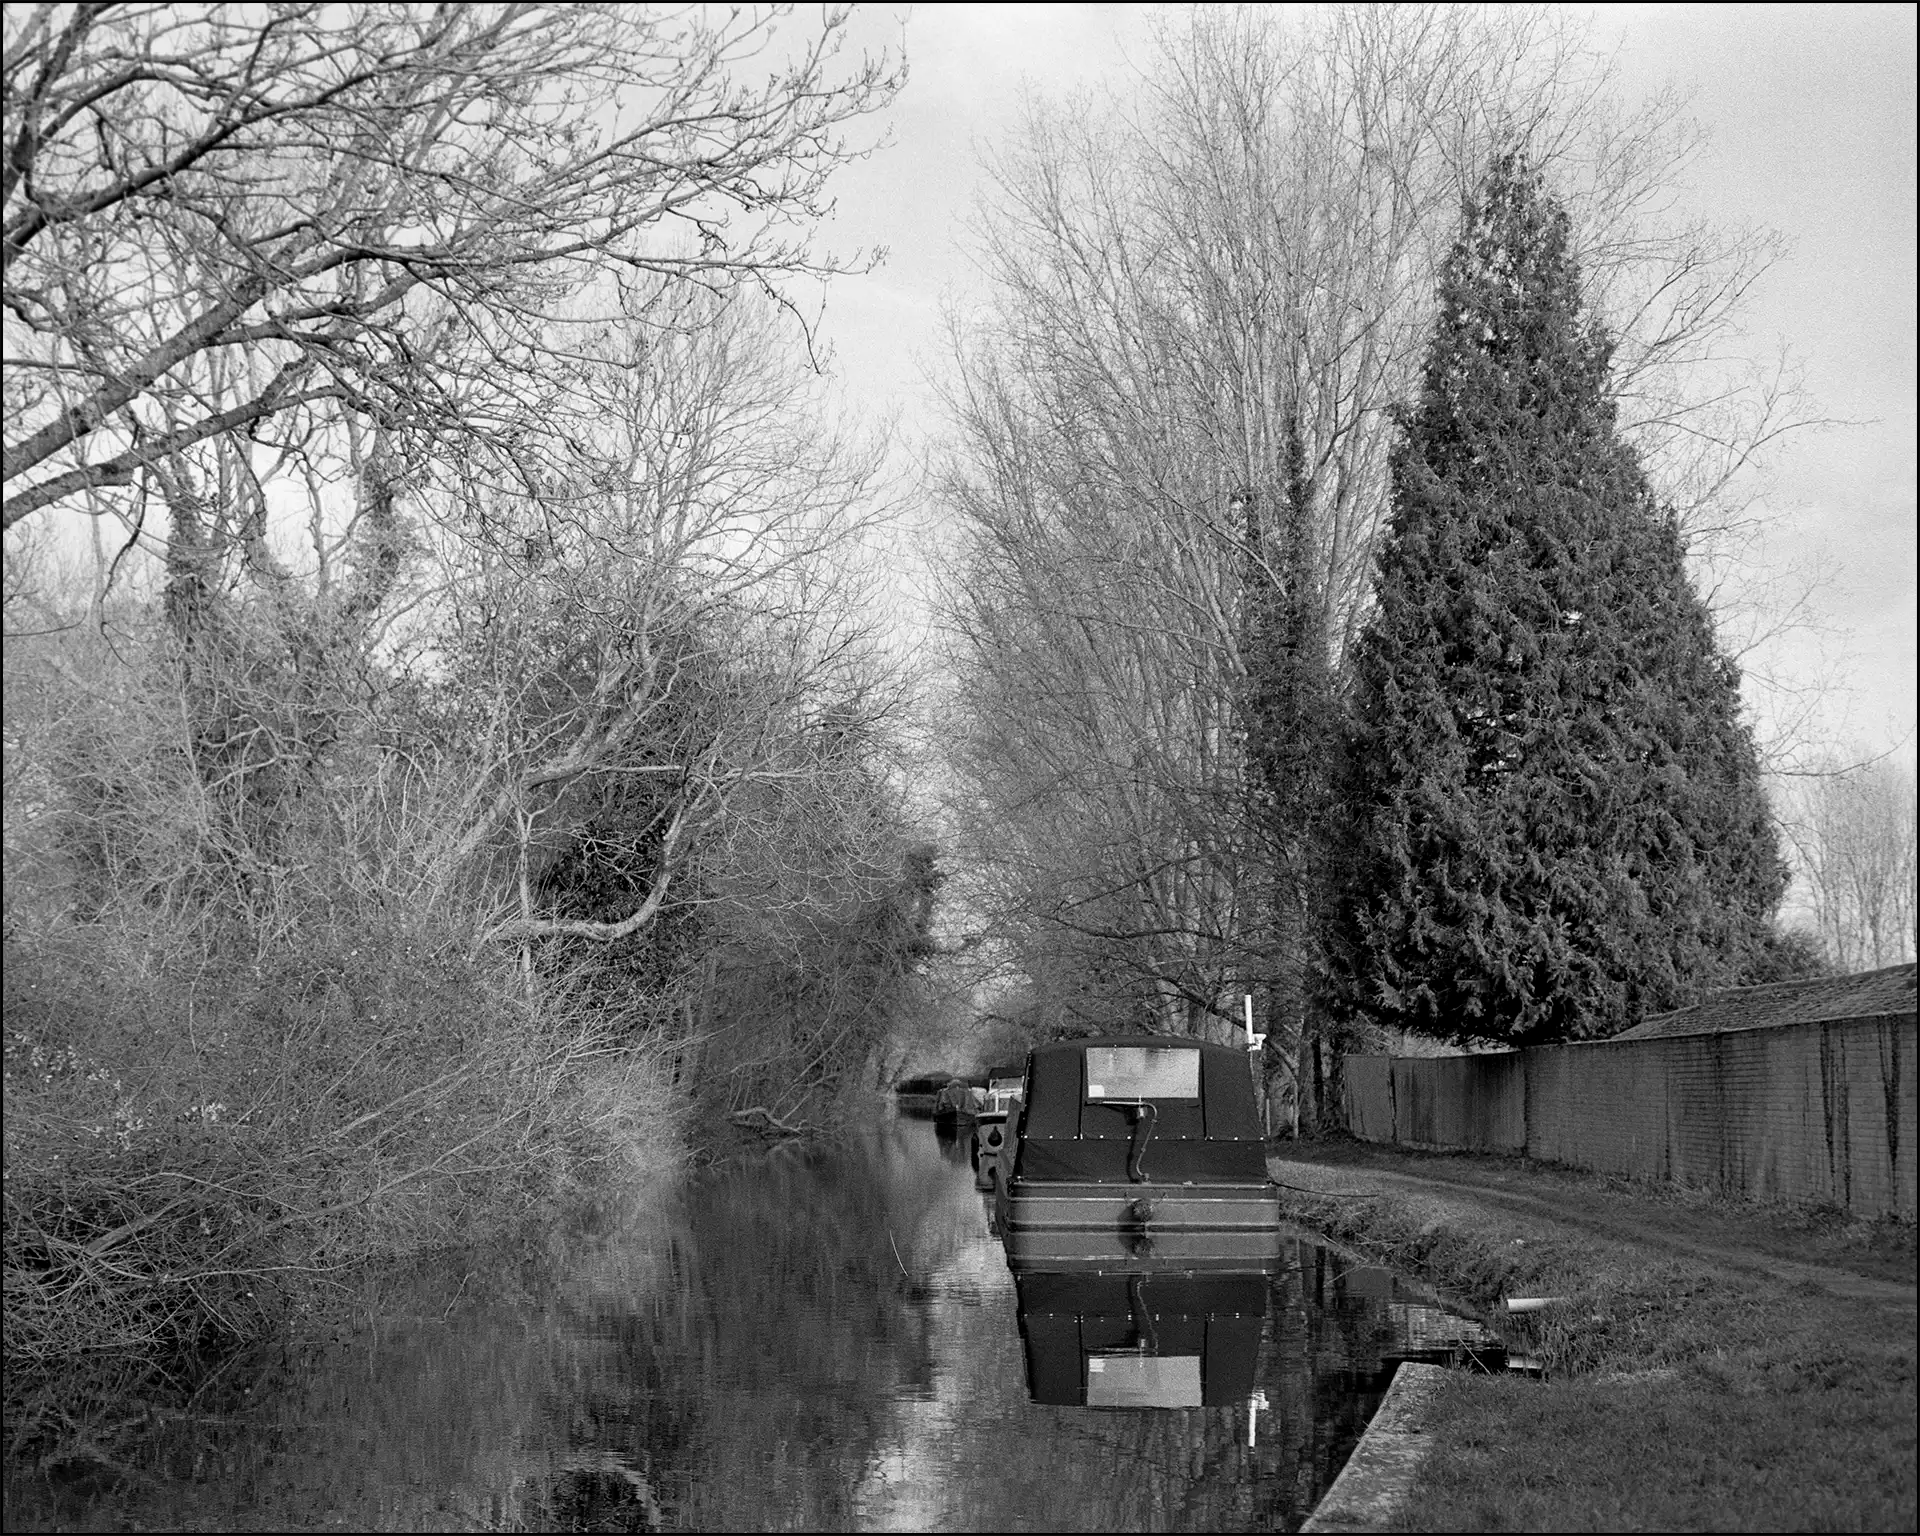 Narrow Boats on the Kennet and Avon Canal. photographed on Kentmere Film